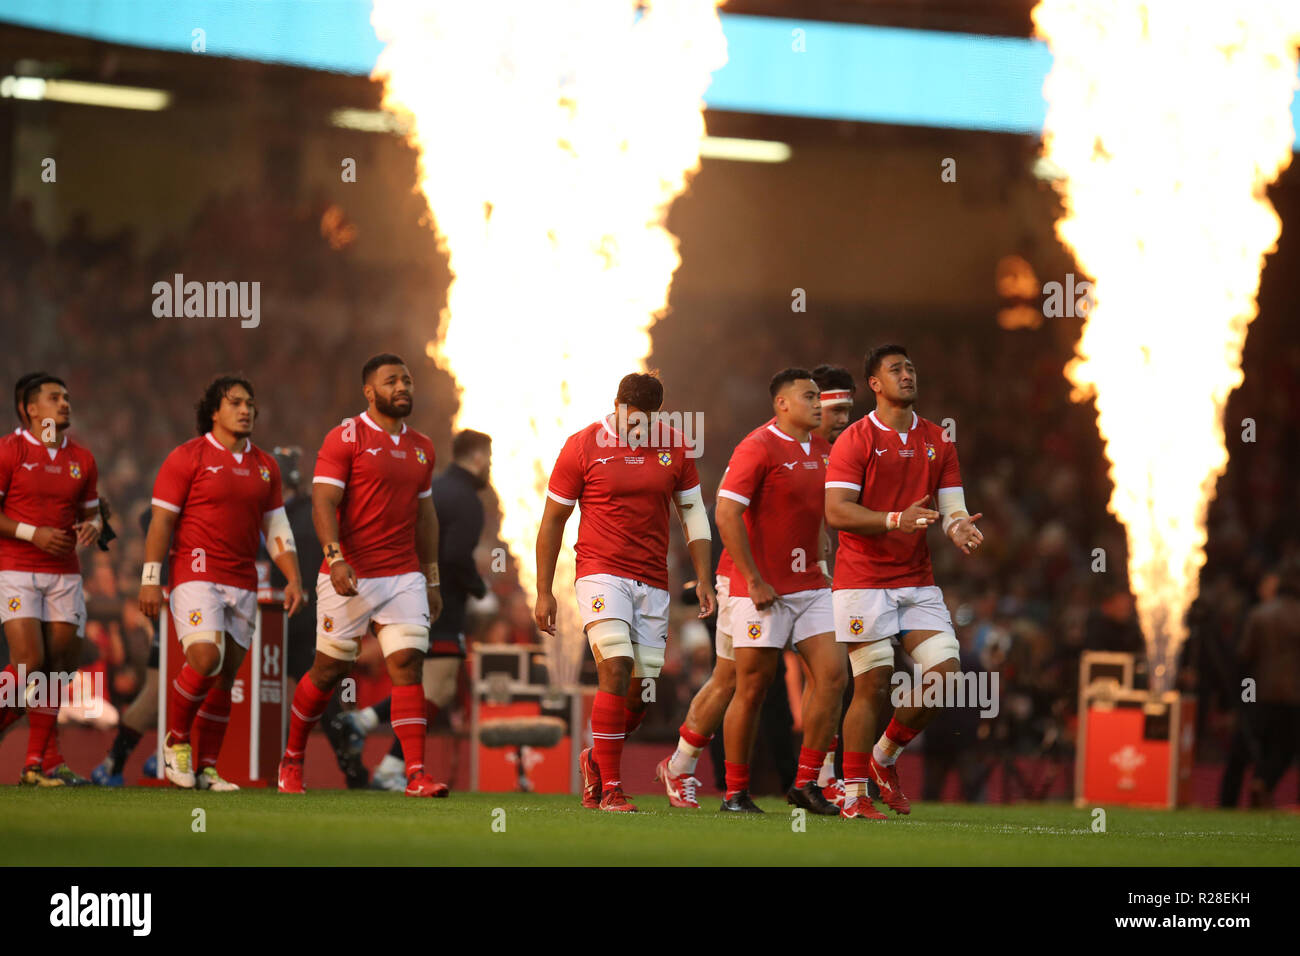 Cardiff, Wales, UK. 17th Nov, 2018. Tonga rugby players walk out onto the  pitch ahead of k/o.Wales v Tonga , Under Armour series Autumn international  rugby match at the Principality Stadium in